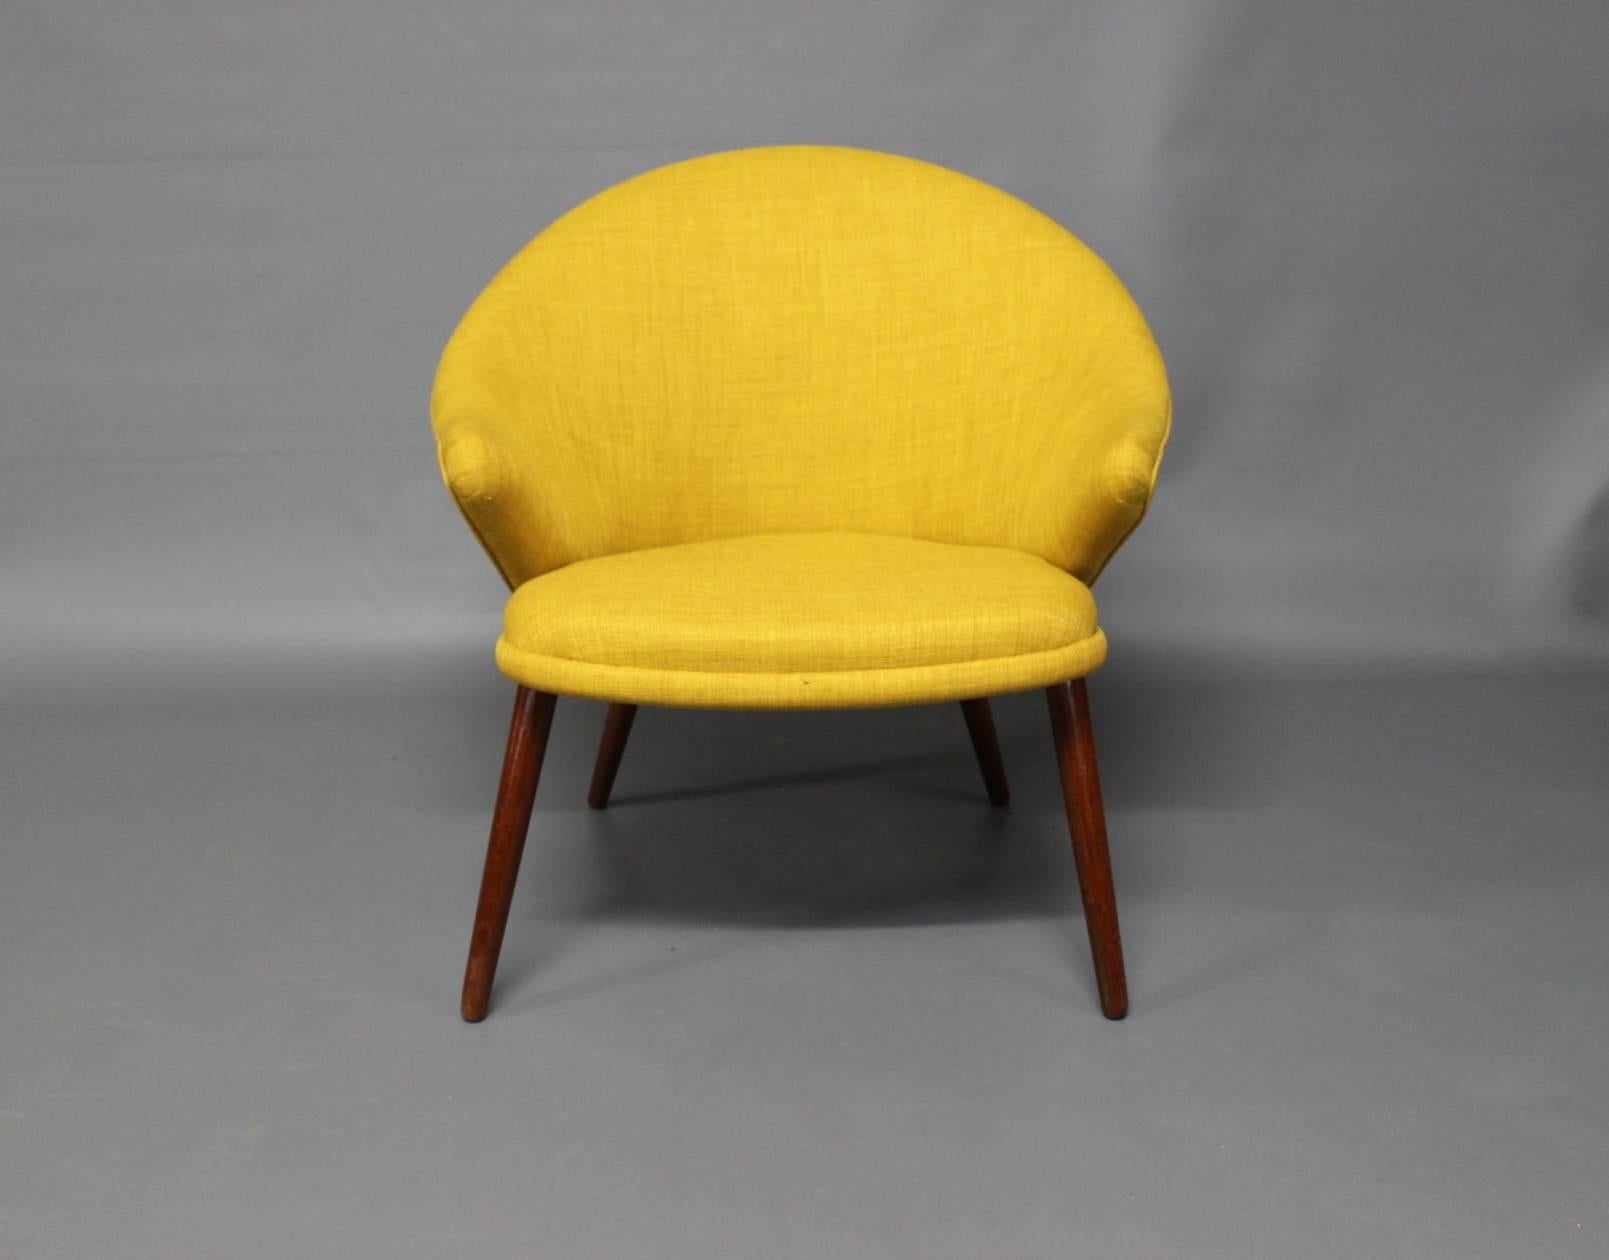 Nanna Ditzel armchair upholstered in yellow fabric and legs of teak. The chair was manufactured in Denmark in the 1960s.